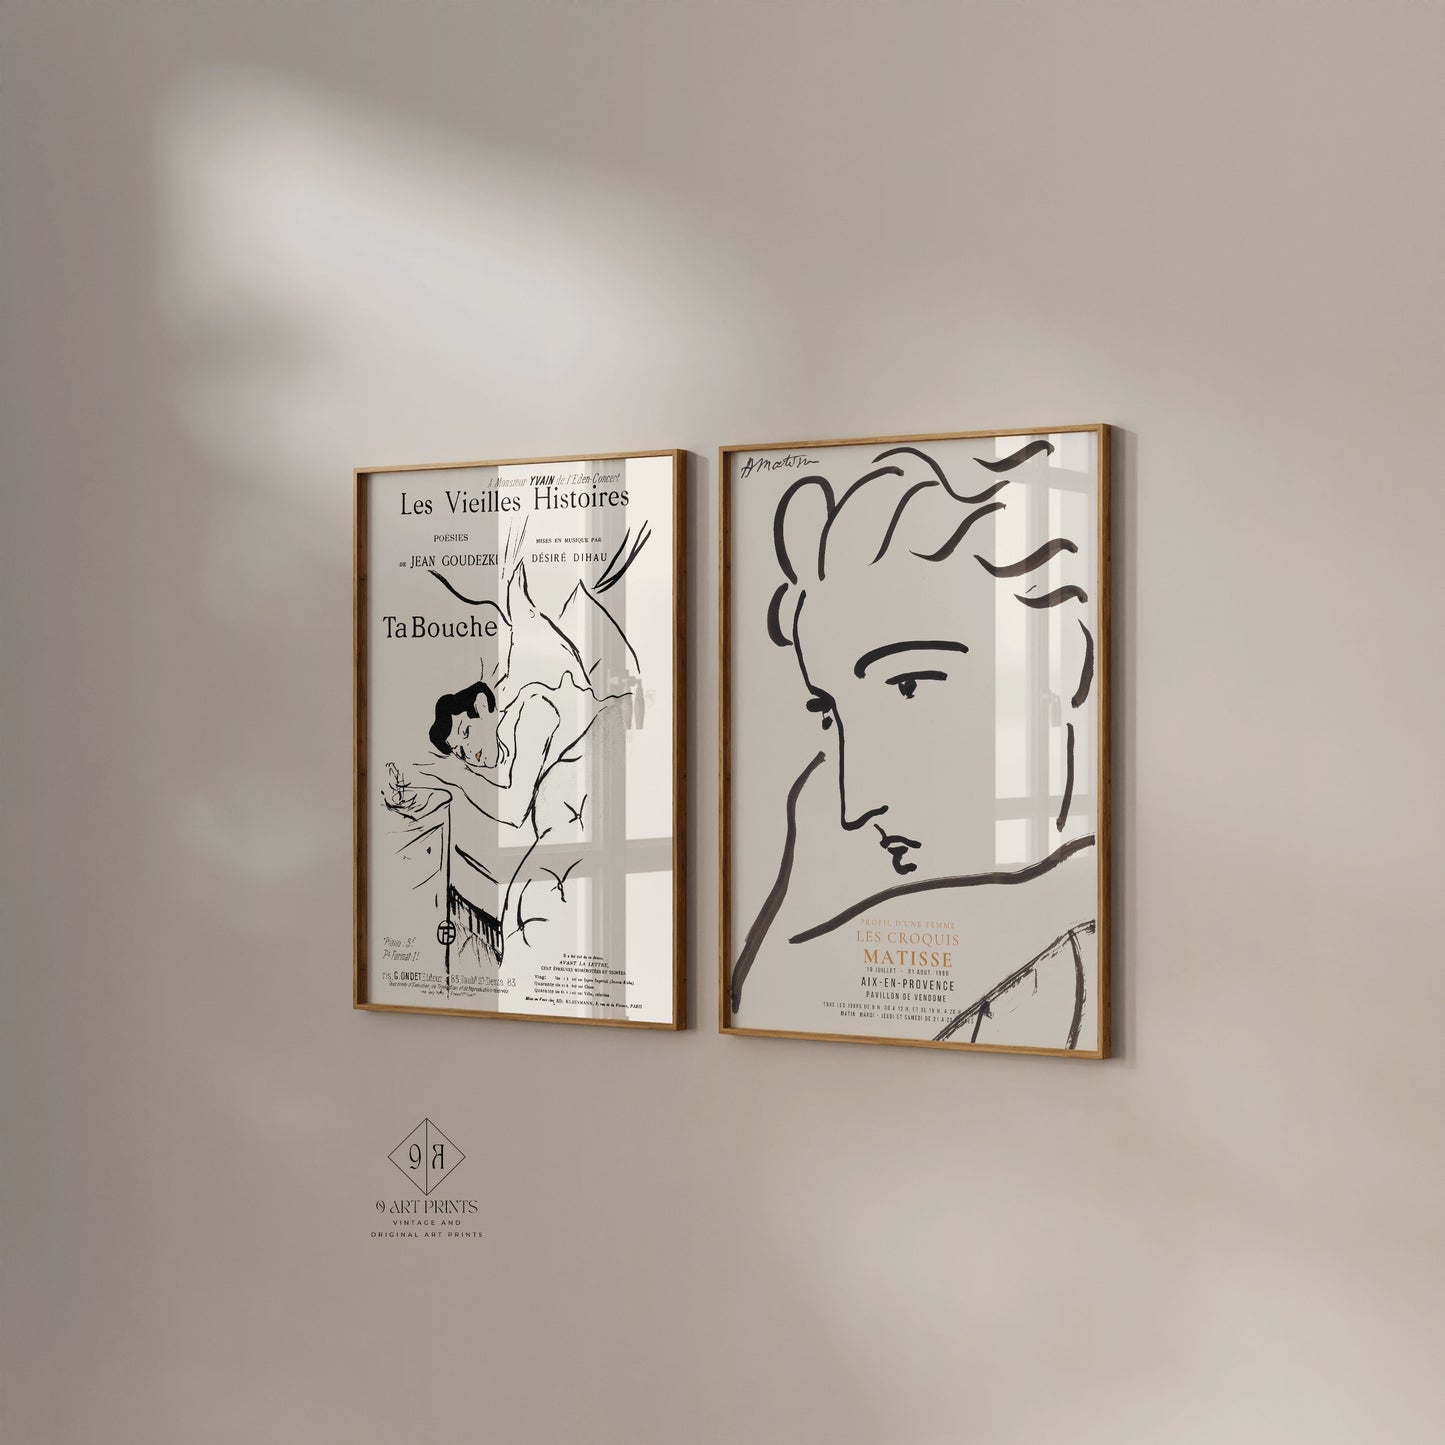 Matisse and Henri Toulouse Lautrec Set of 2 Neutral Posters - Profile of a Woman and Ta Bouche | Available framed or unframed